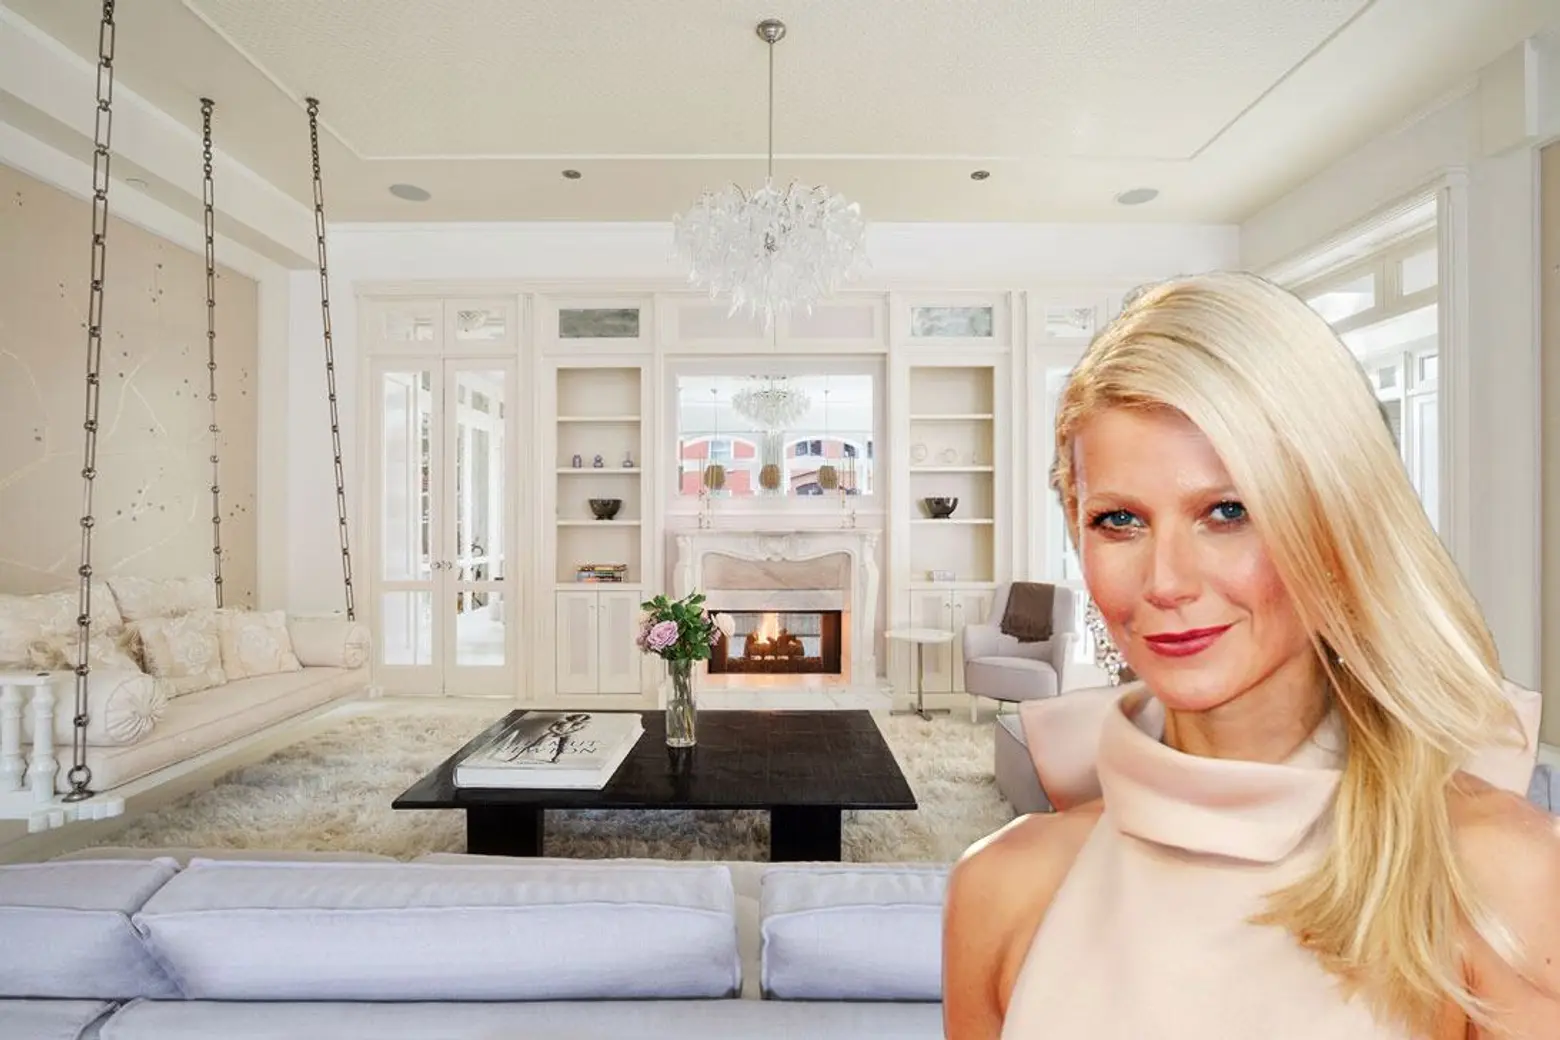 Gwyneth Paltrow’s all-white Tribeca penthouse gets $3M price chop and lots of listing photos